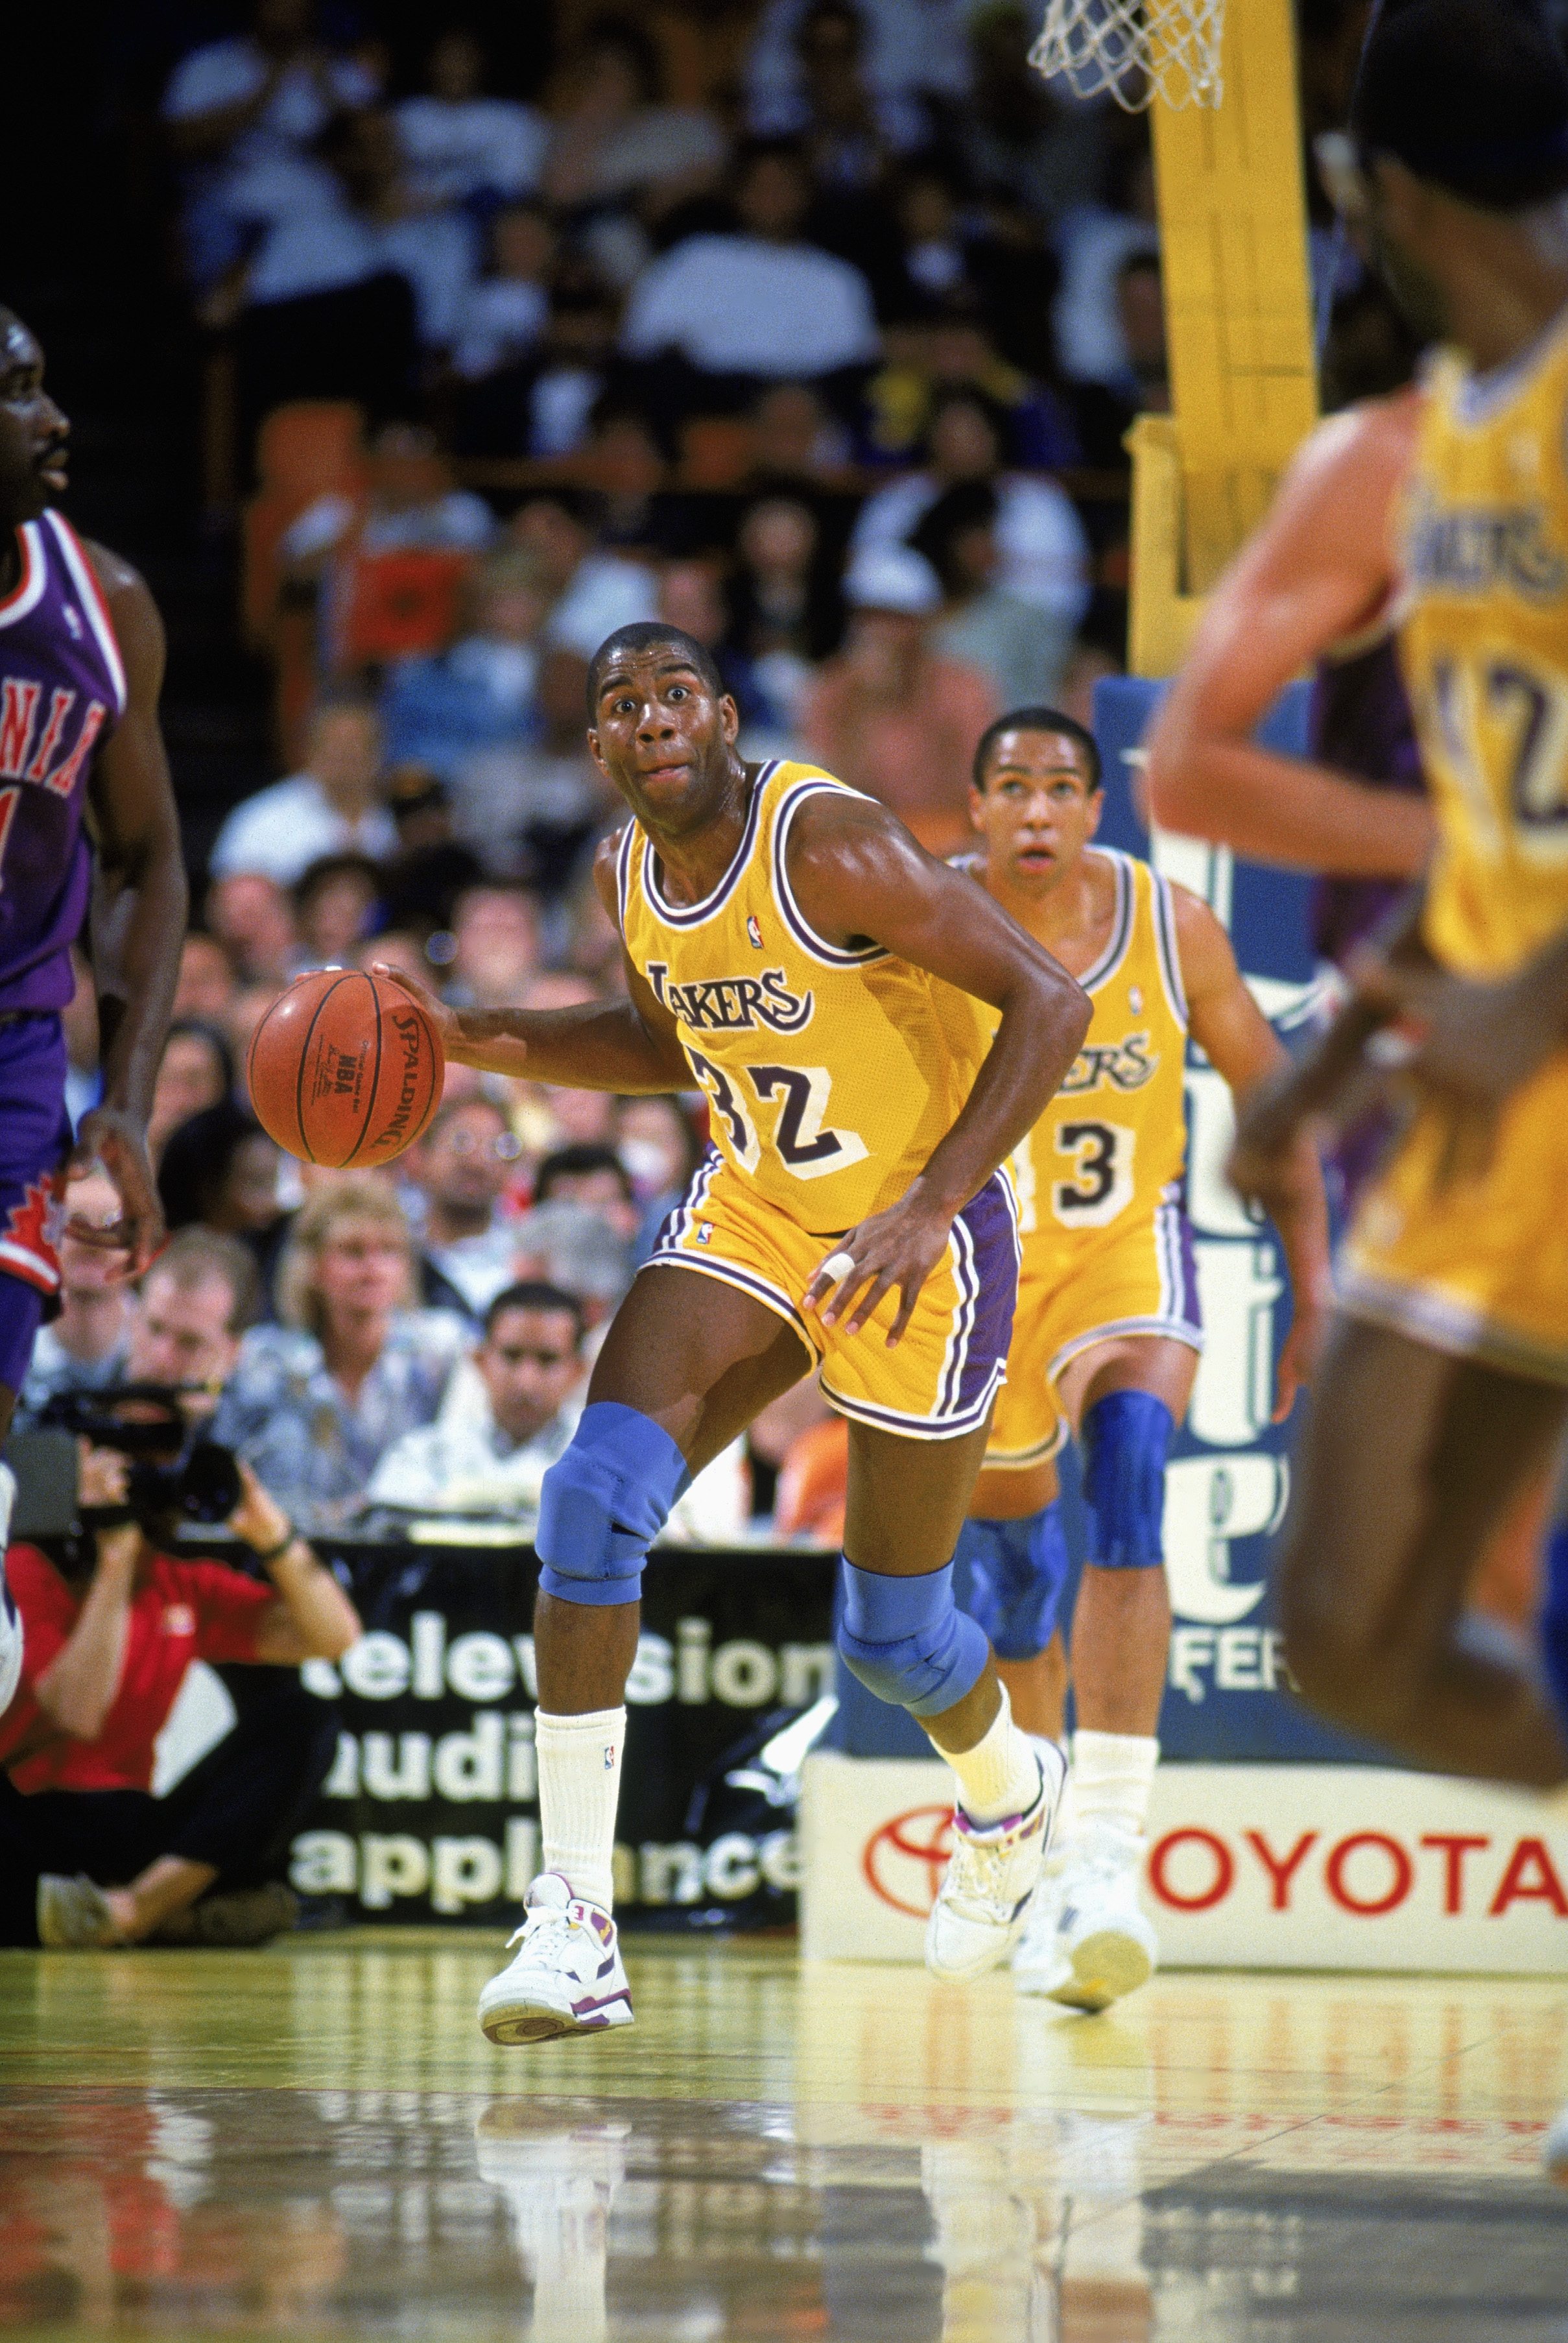 PHOENIX - APRIL 1991:  Earving Johnson #32 of the Los Angeles Lakers advances the ball against the Phoenix Suns during a game at America West Arena circa April of 1991 in Phoenix, Arizona.  NOTE TO USER: User expressly acknowledges and agrees that, by dow